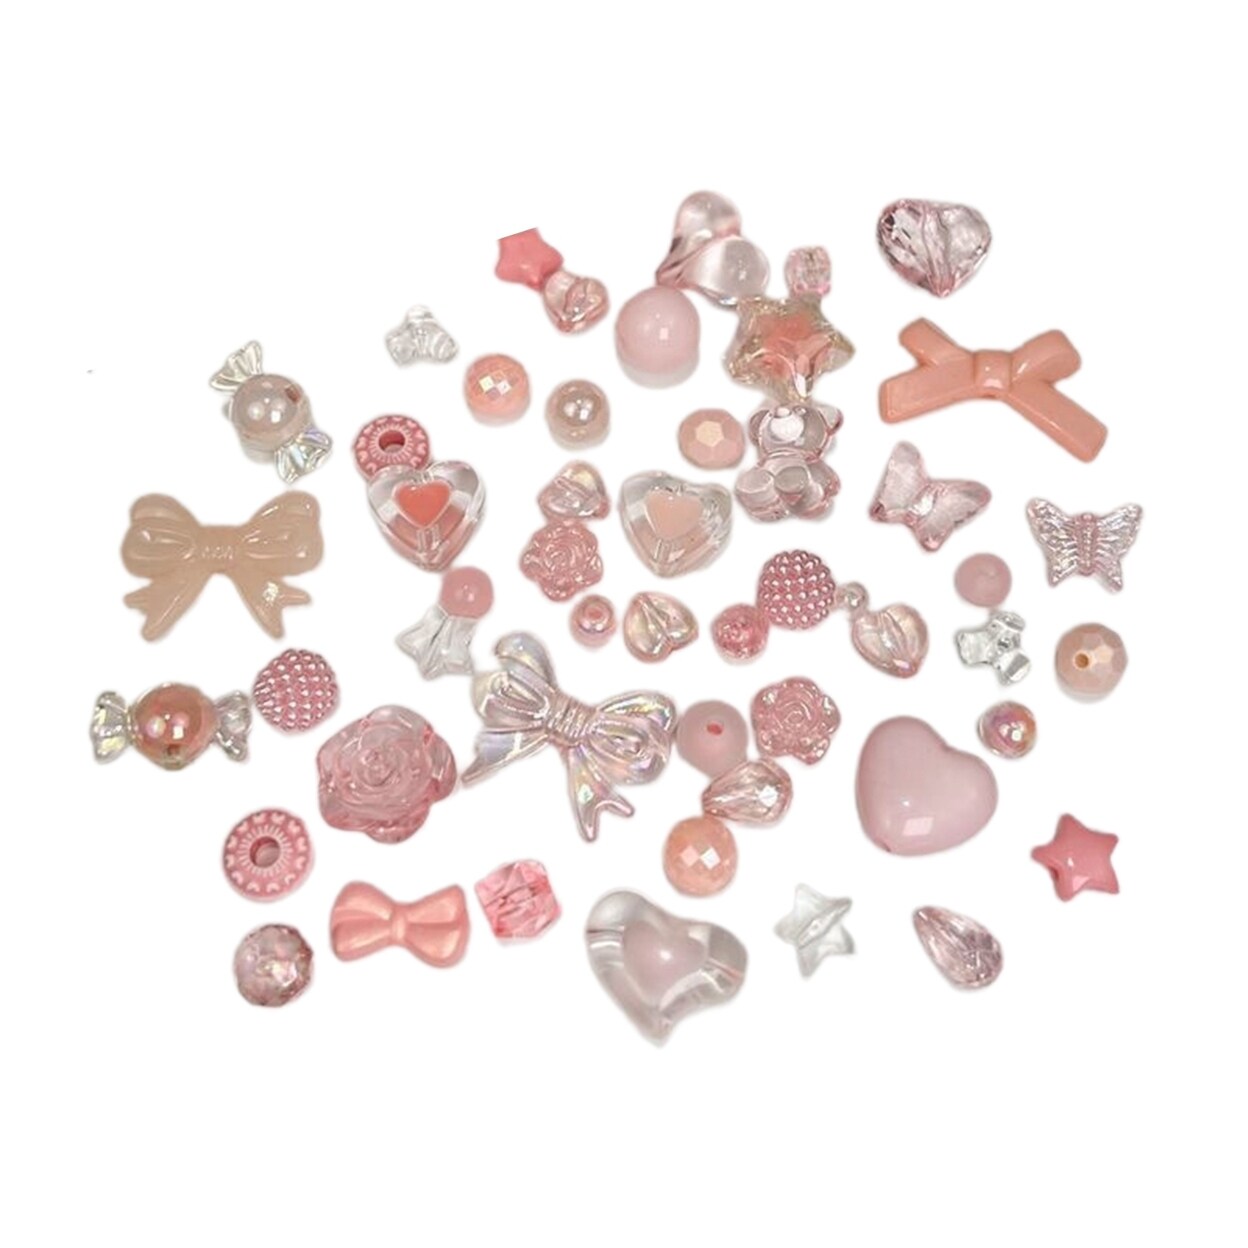 Generic 50g Loose Beads Flower Bear Mixing Style Geometric Jewelry Making Accessories Phone Case Decoration